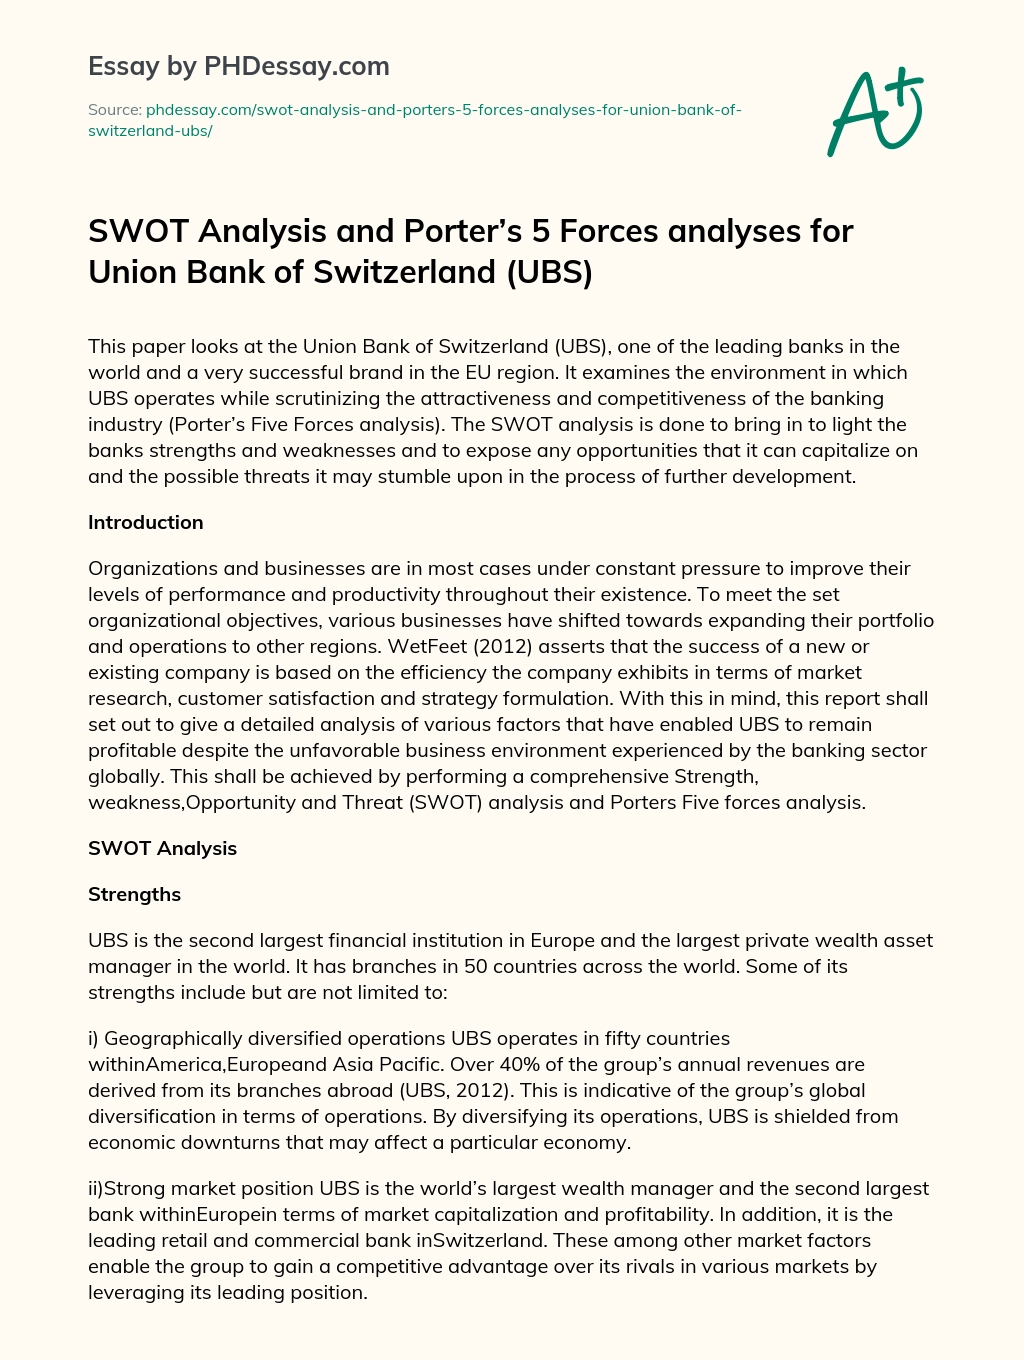 SWOT Analysis and Porter’s 5 Forces analyses for Union Bank of Switzerland (UBS) essay